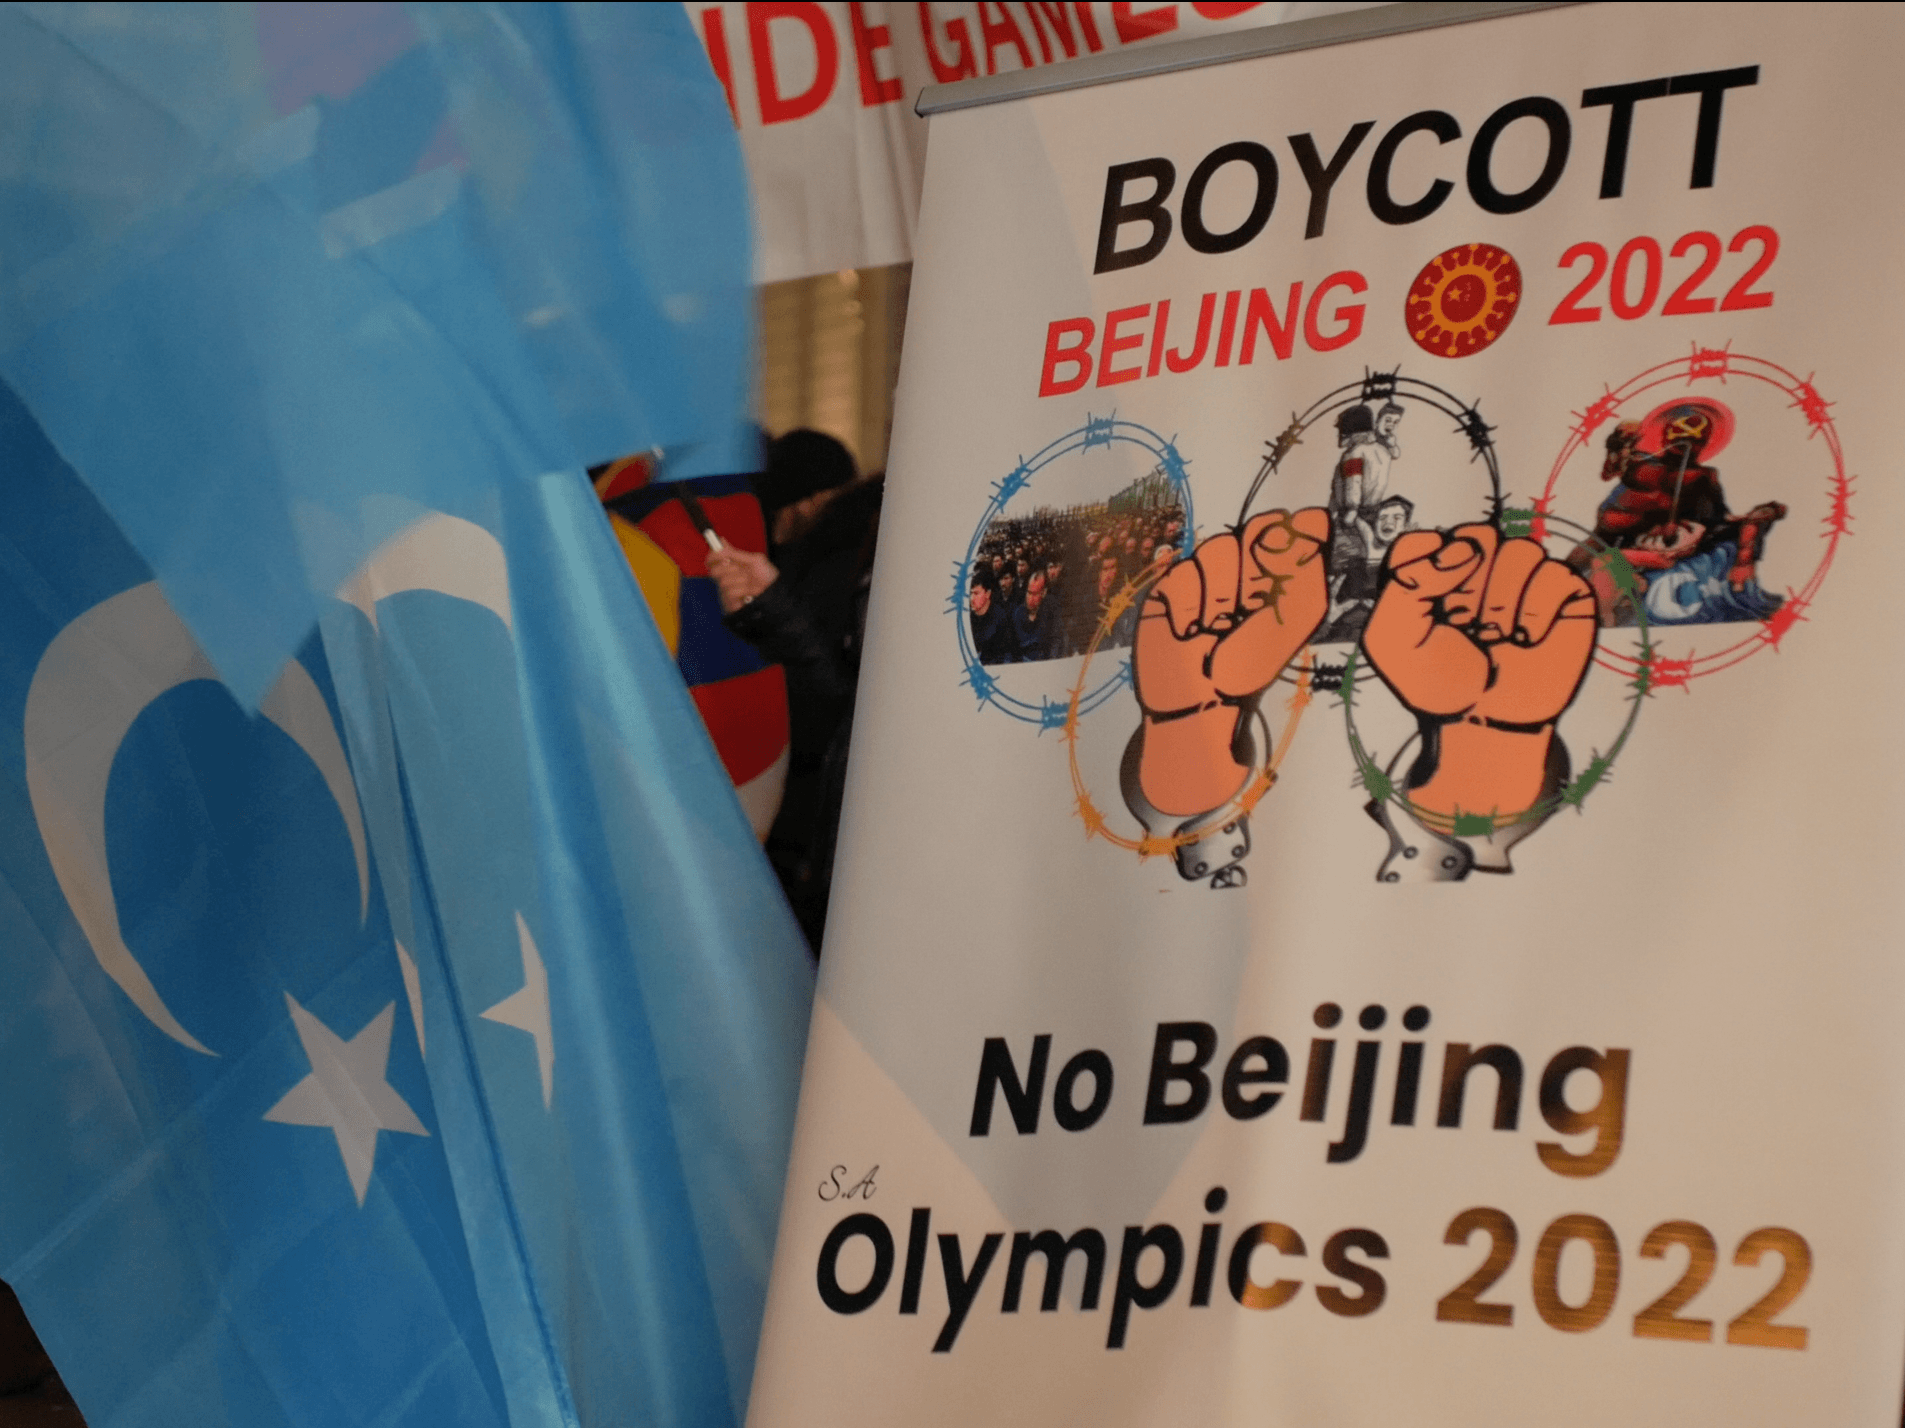 An activist holds a placard at a protest in London calling for a boycott of the Beijing Olympics, February 3rd, 2022. Kurt Zindulka, Breitbart News